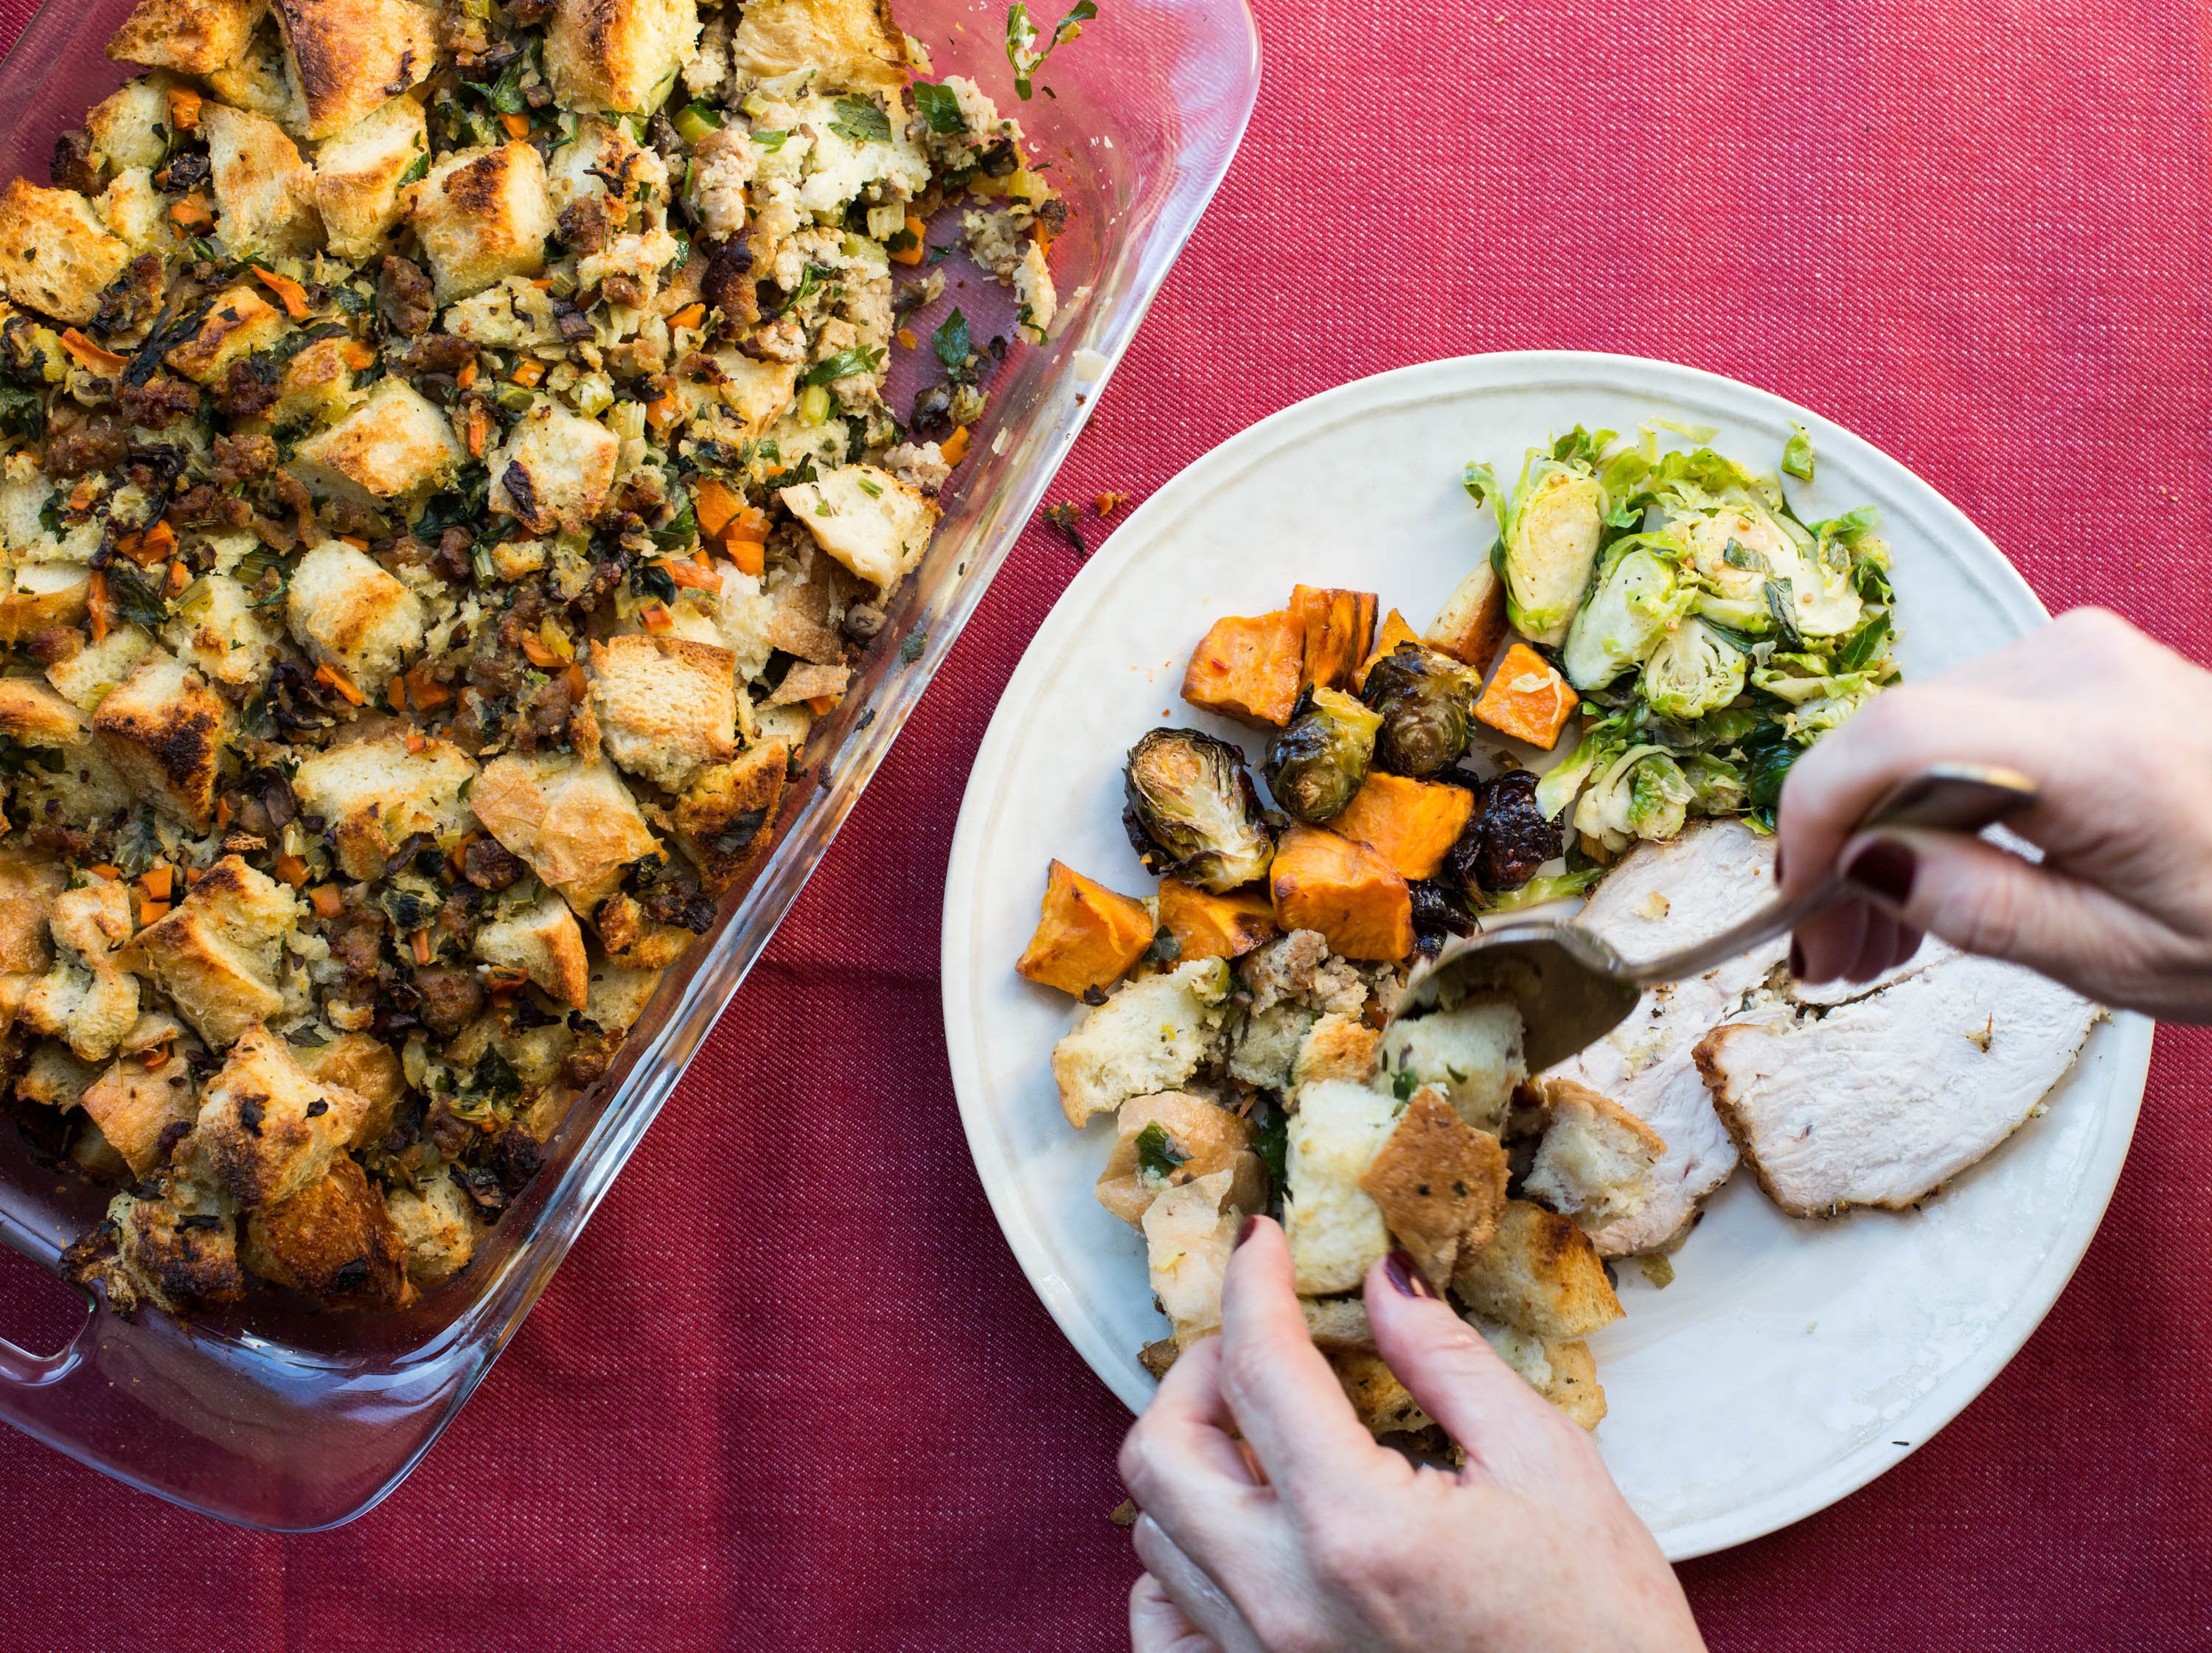 Woman adding Bread Stuffing with Turkey Sausage to a plate with casserole of stuffing nearby.